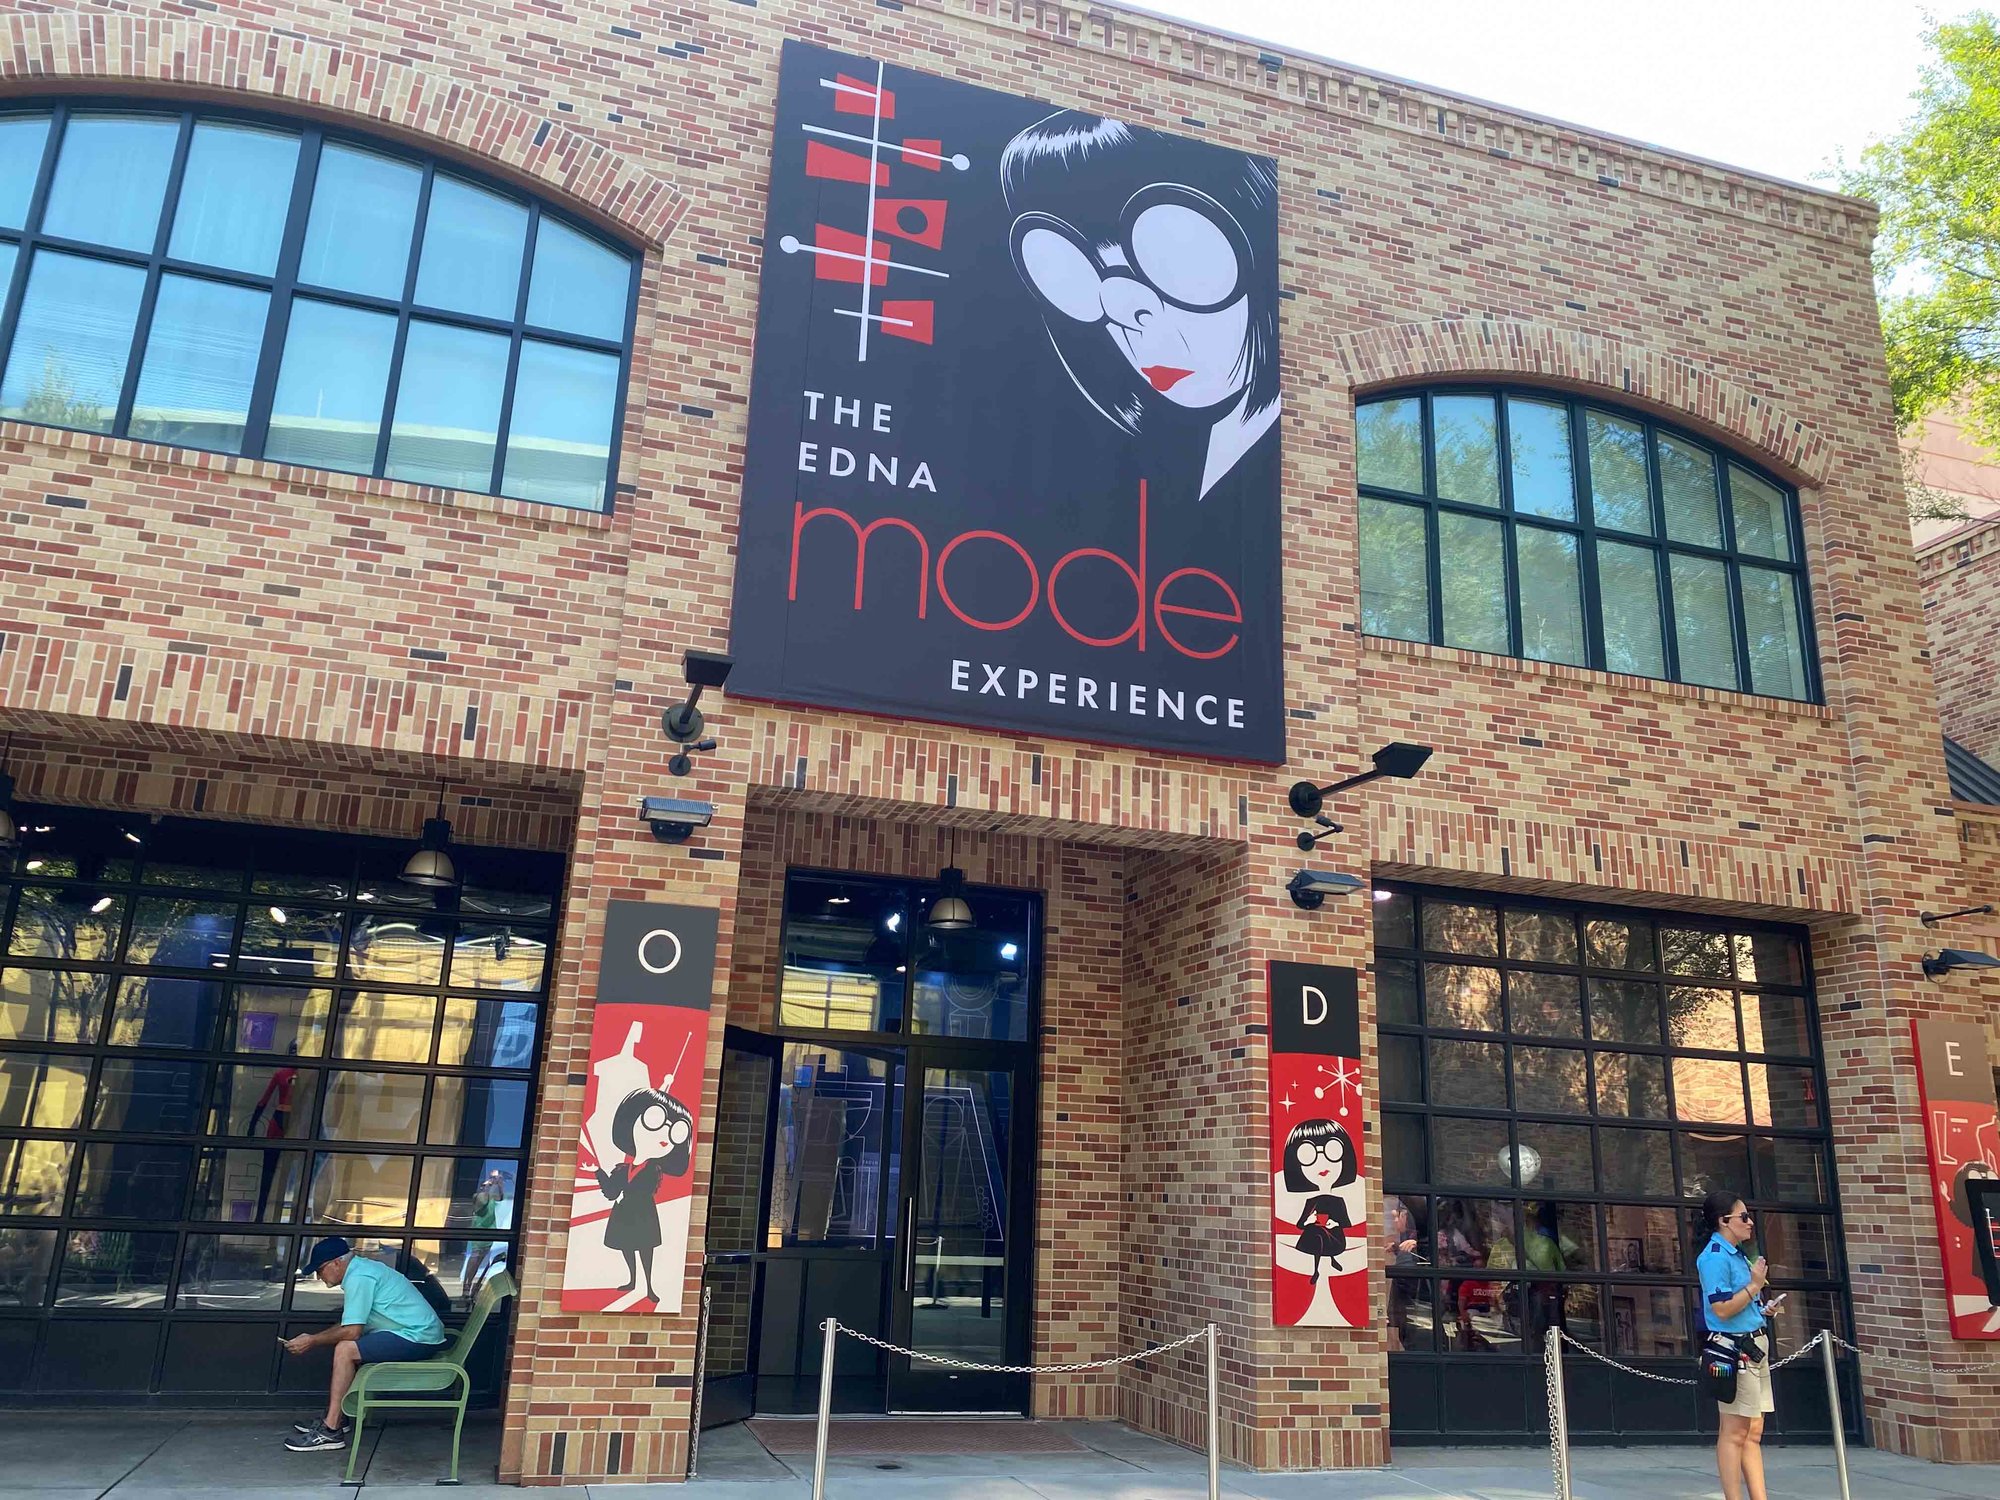 edna mode experience sign and building